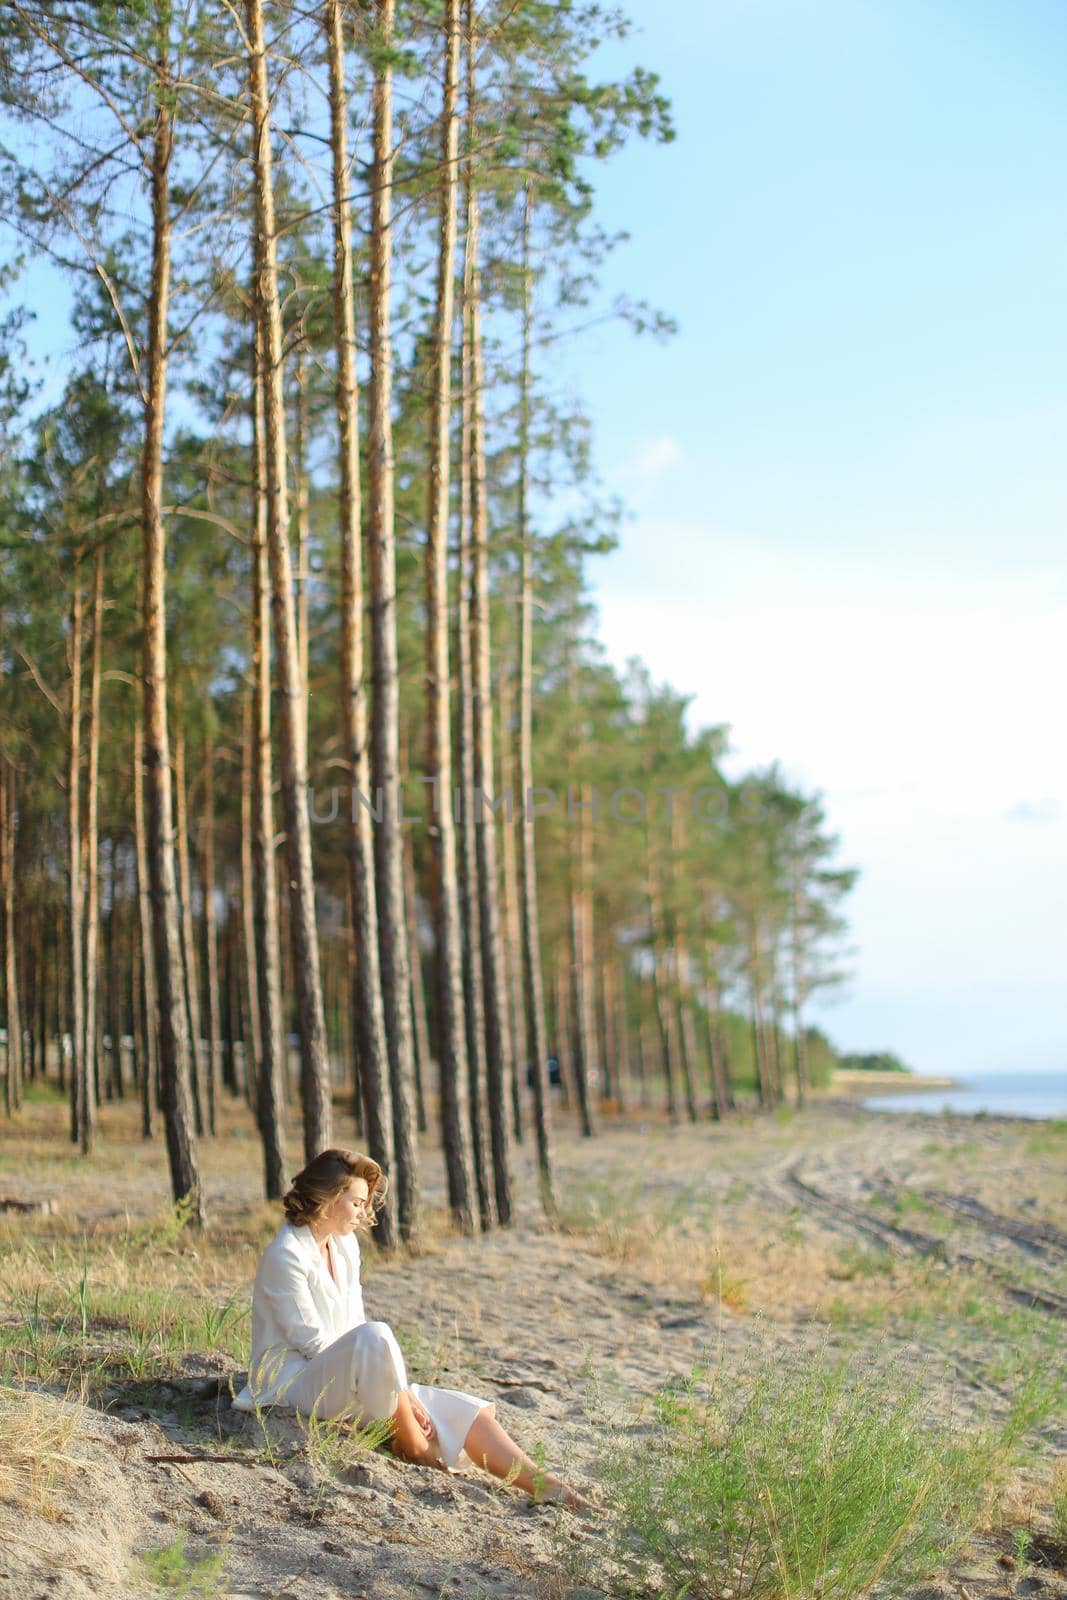 Young lady sitting on sand beach with trees in background. by sisterspro